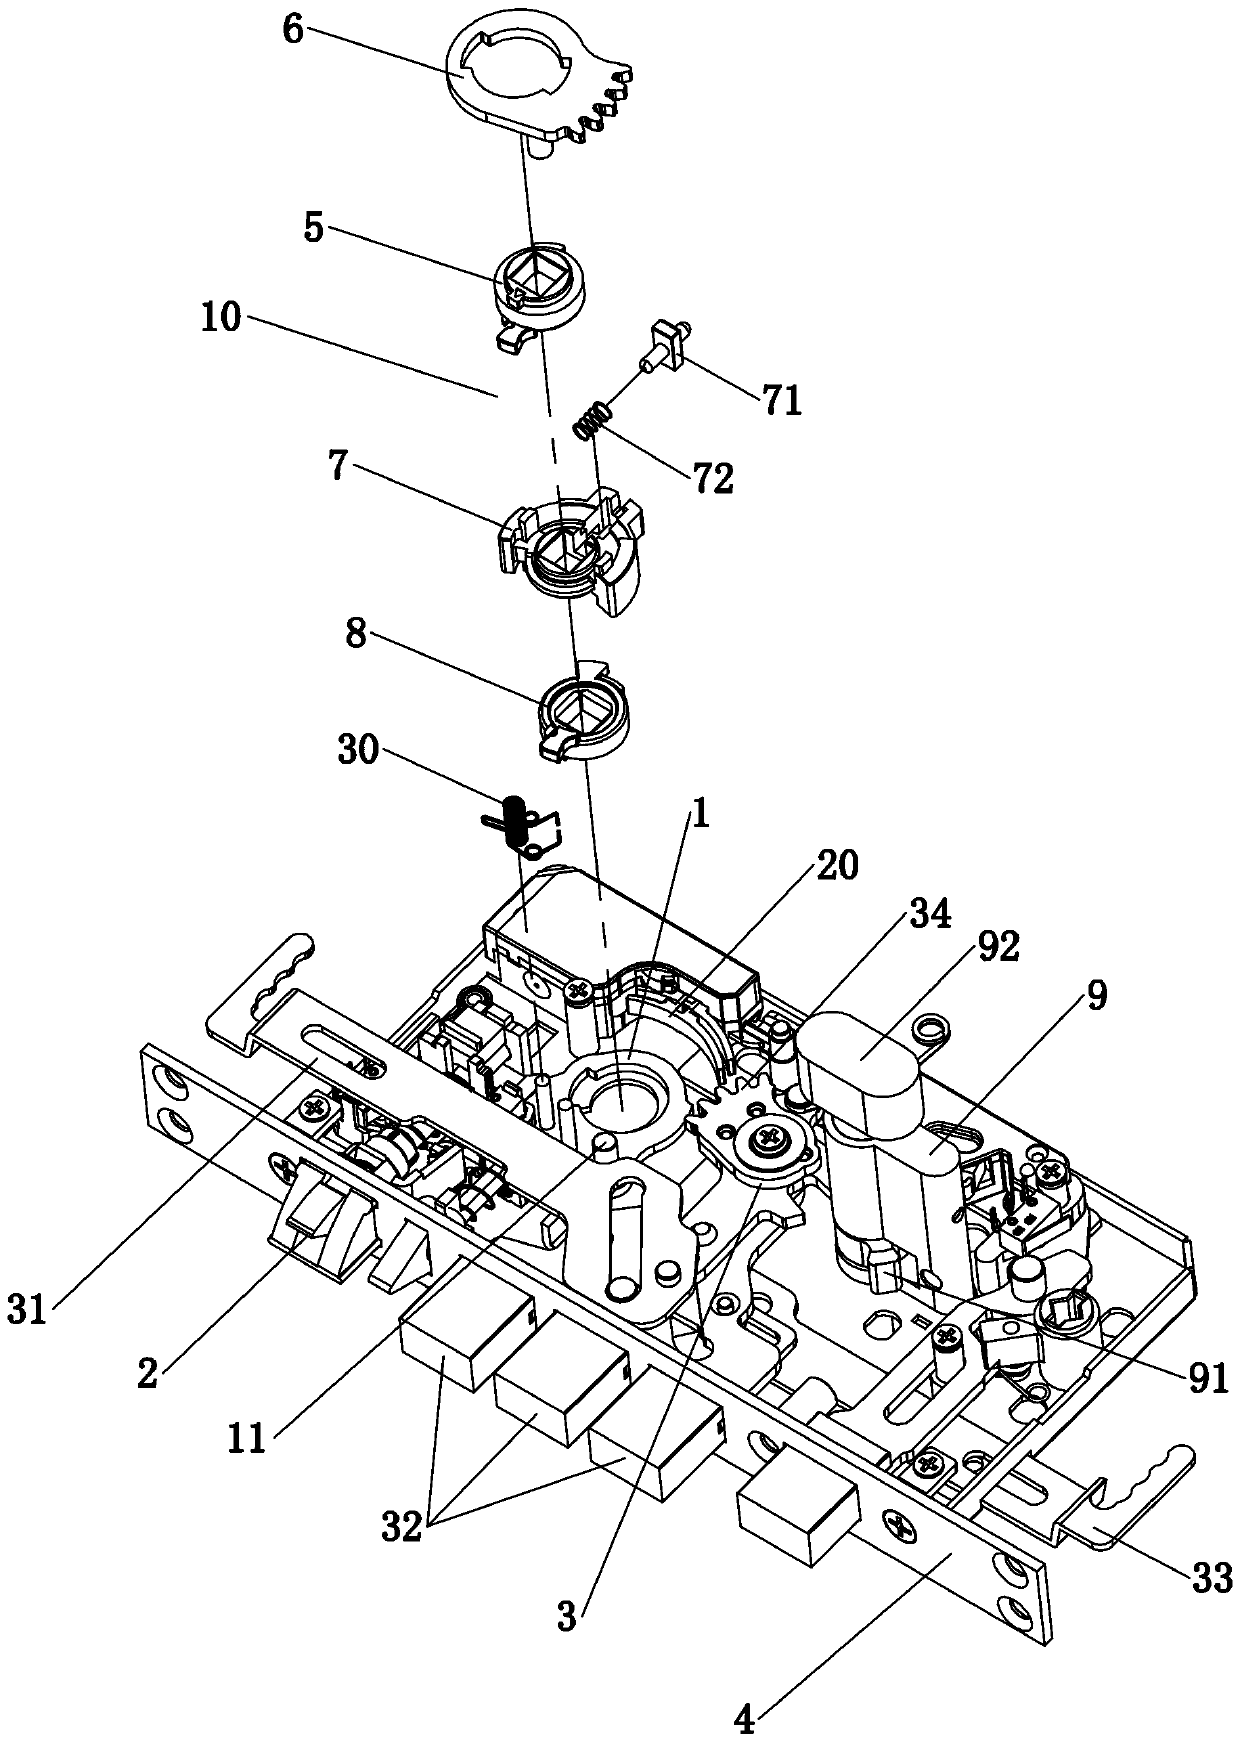 Door lock engagement and disengagement shifting fork device